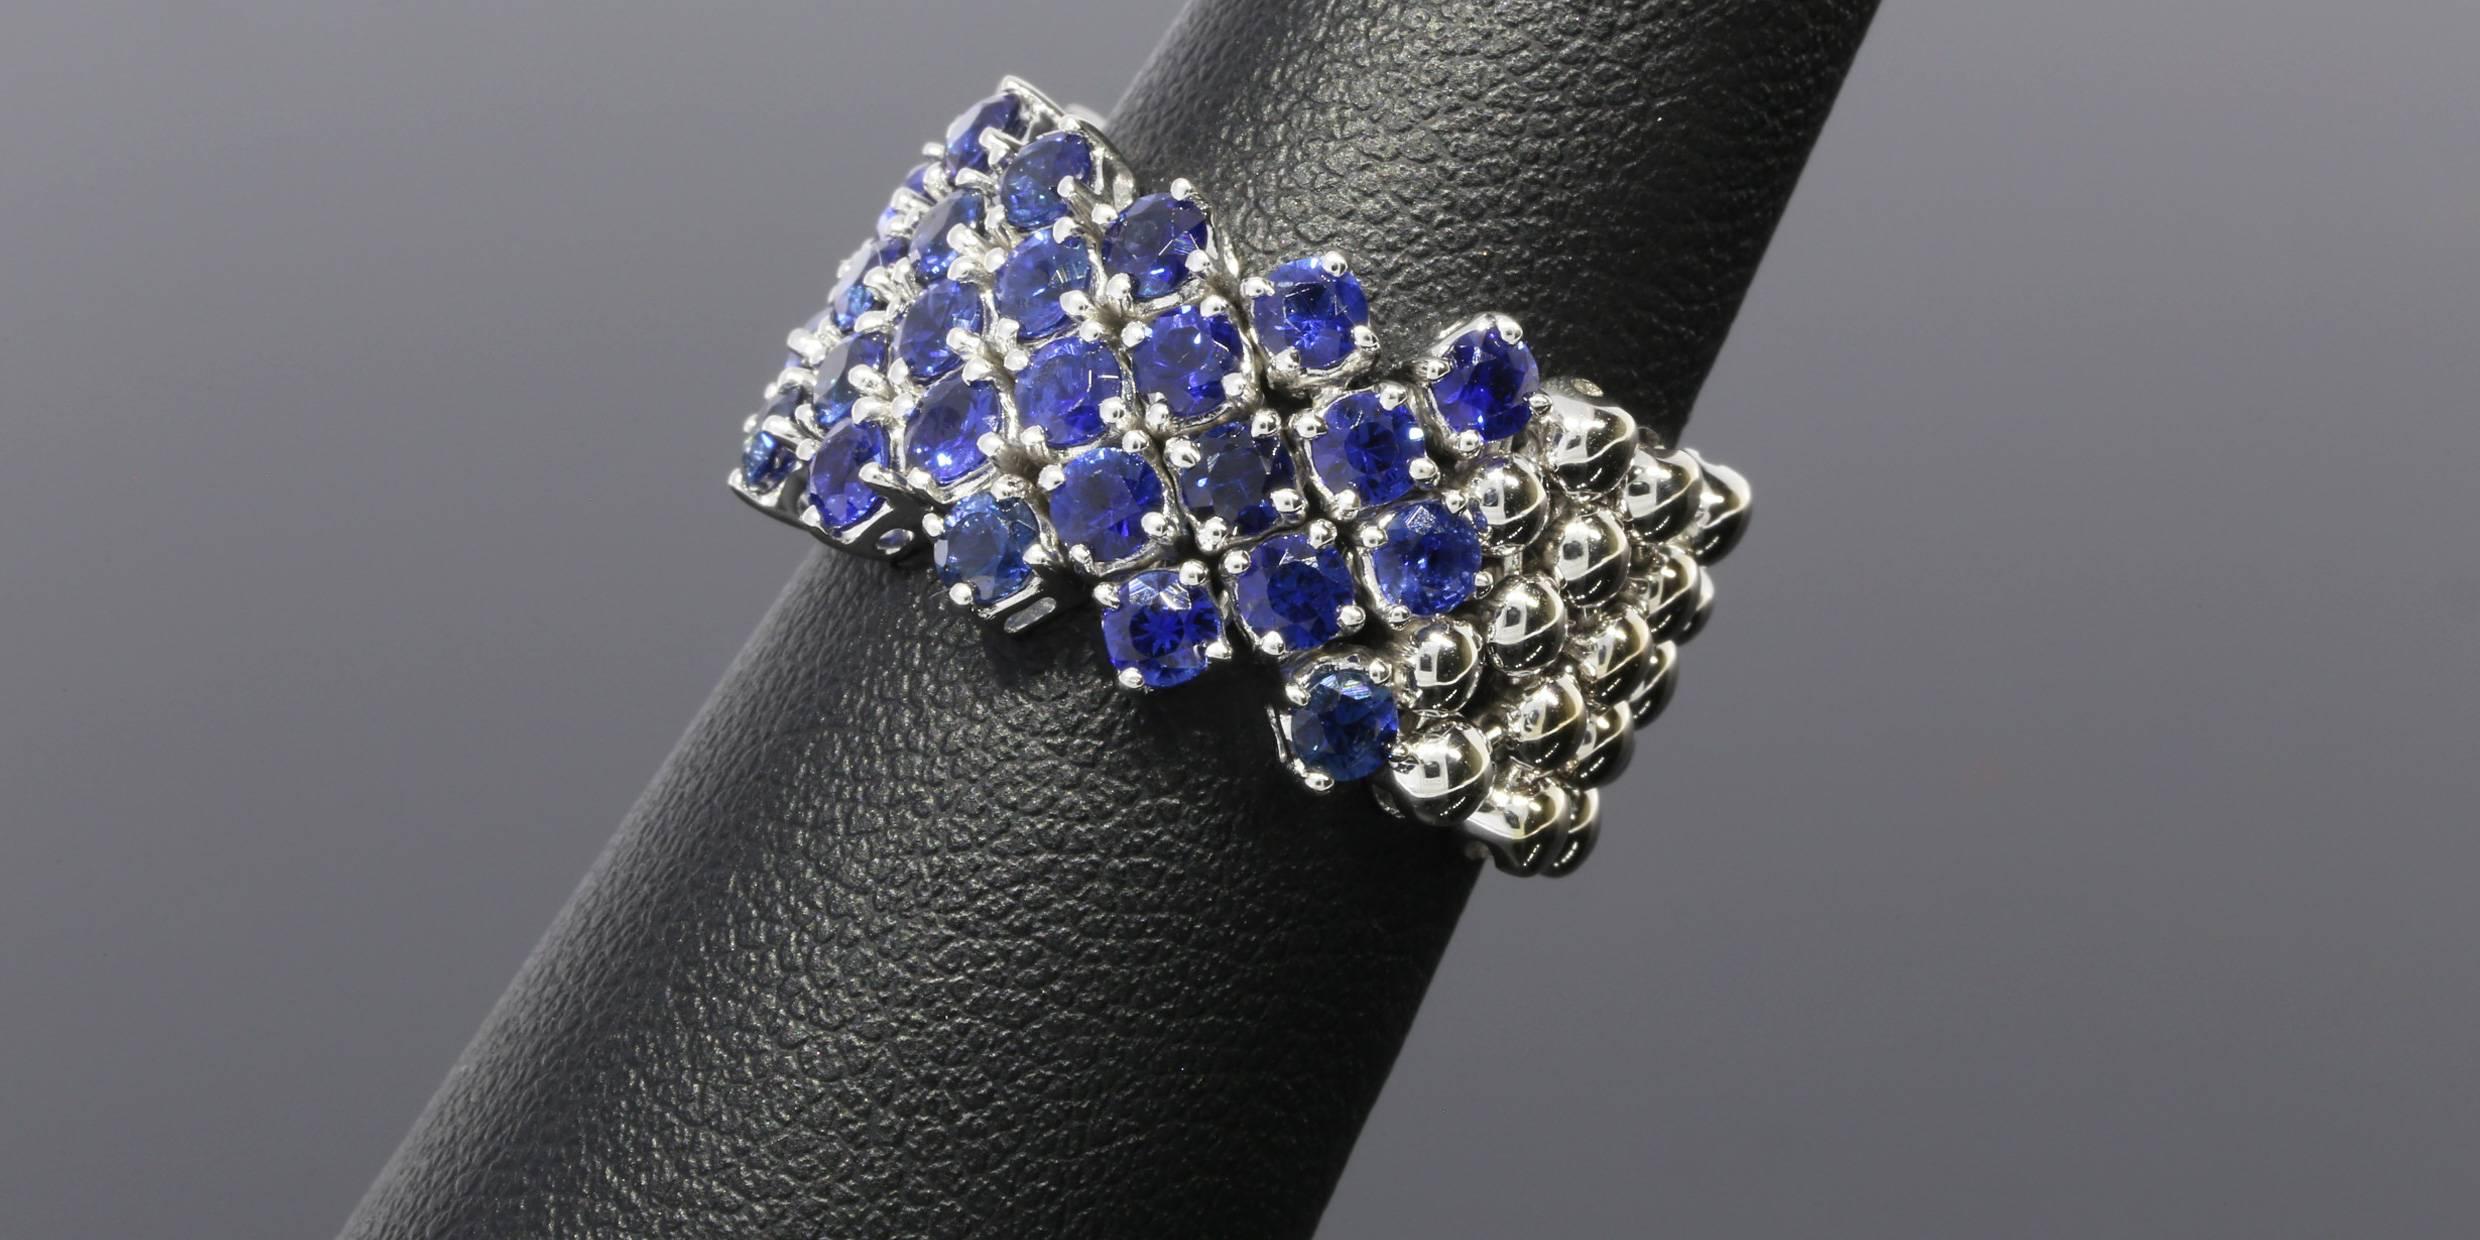 This beautiful & unique band is an 18 karat white gold sapphire flexible band ring. The ring has 33 natural, round, blue sapphires that have a combined total weight of 3 carats. The sapphires are prong set, & the mesh style ring is flexible except